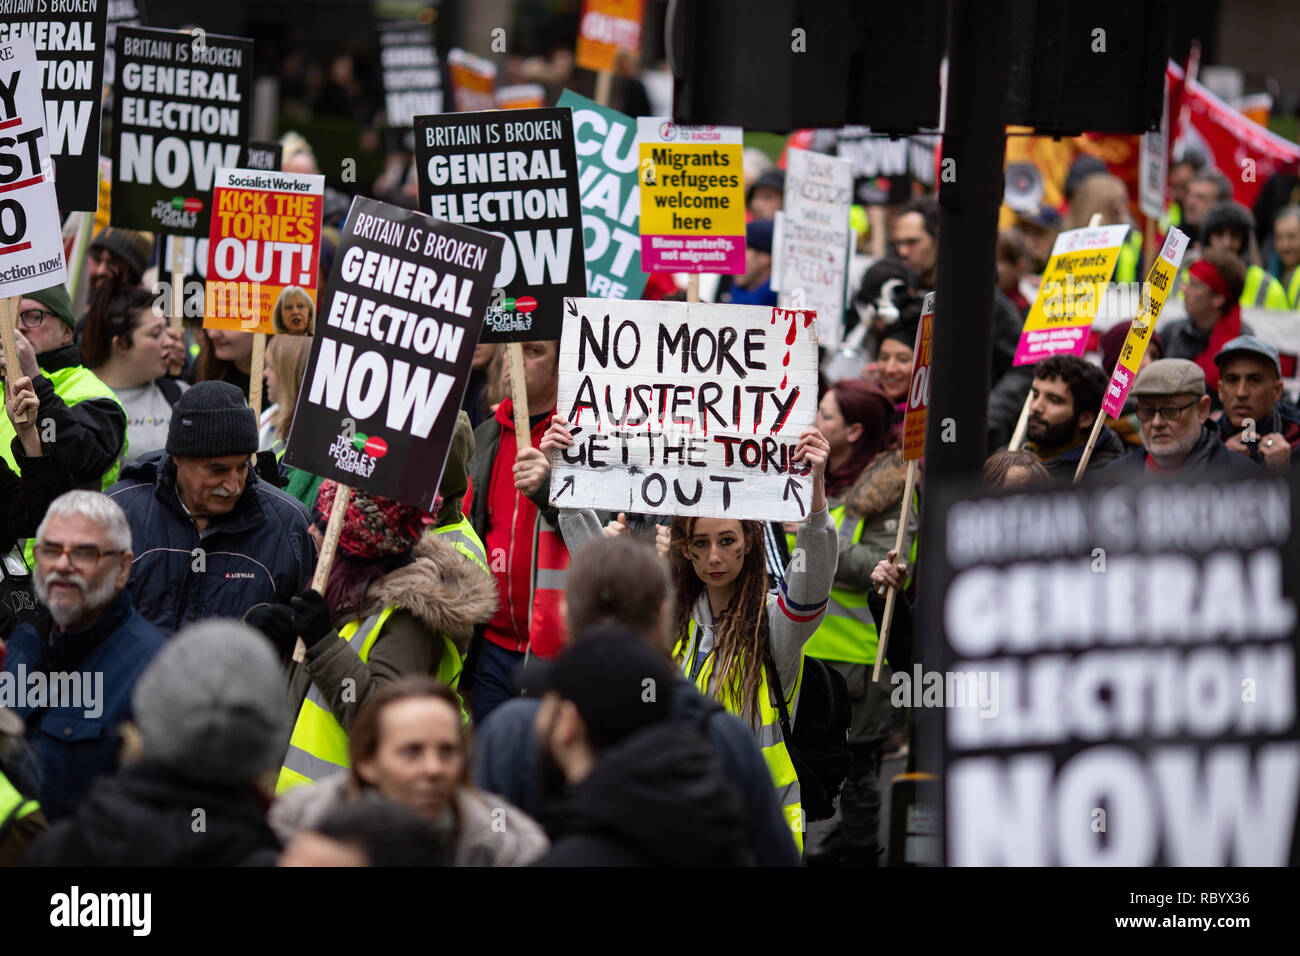 A demonstrator seen holding up a 'no more austerity, get the tories out' placard during the protest. Thousands rallied in central London for the 'People’s Assembly against Austerity' inspired by the French 'Yellow Vest' protests bringing attention to austerity programs that have hit the poor hard. Stock Photo